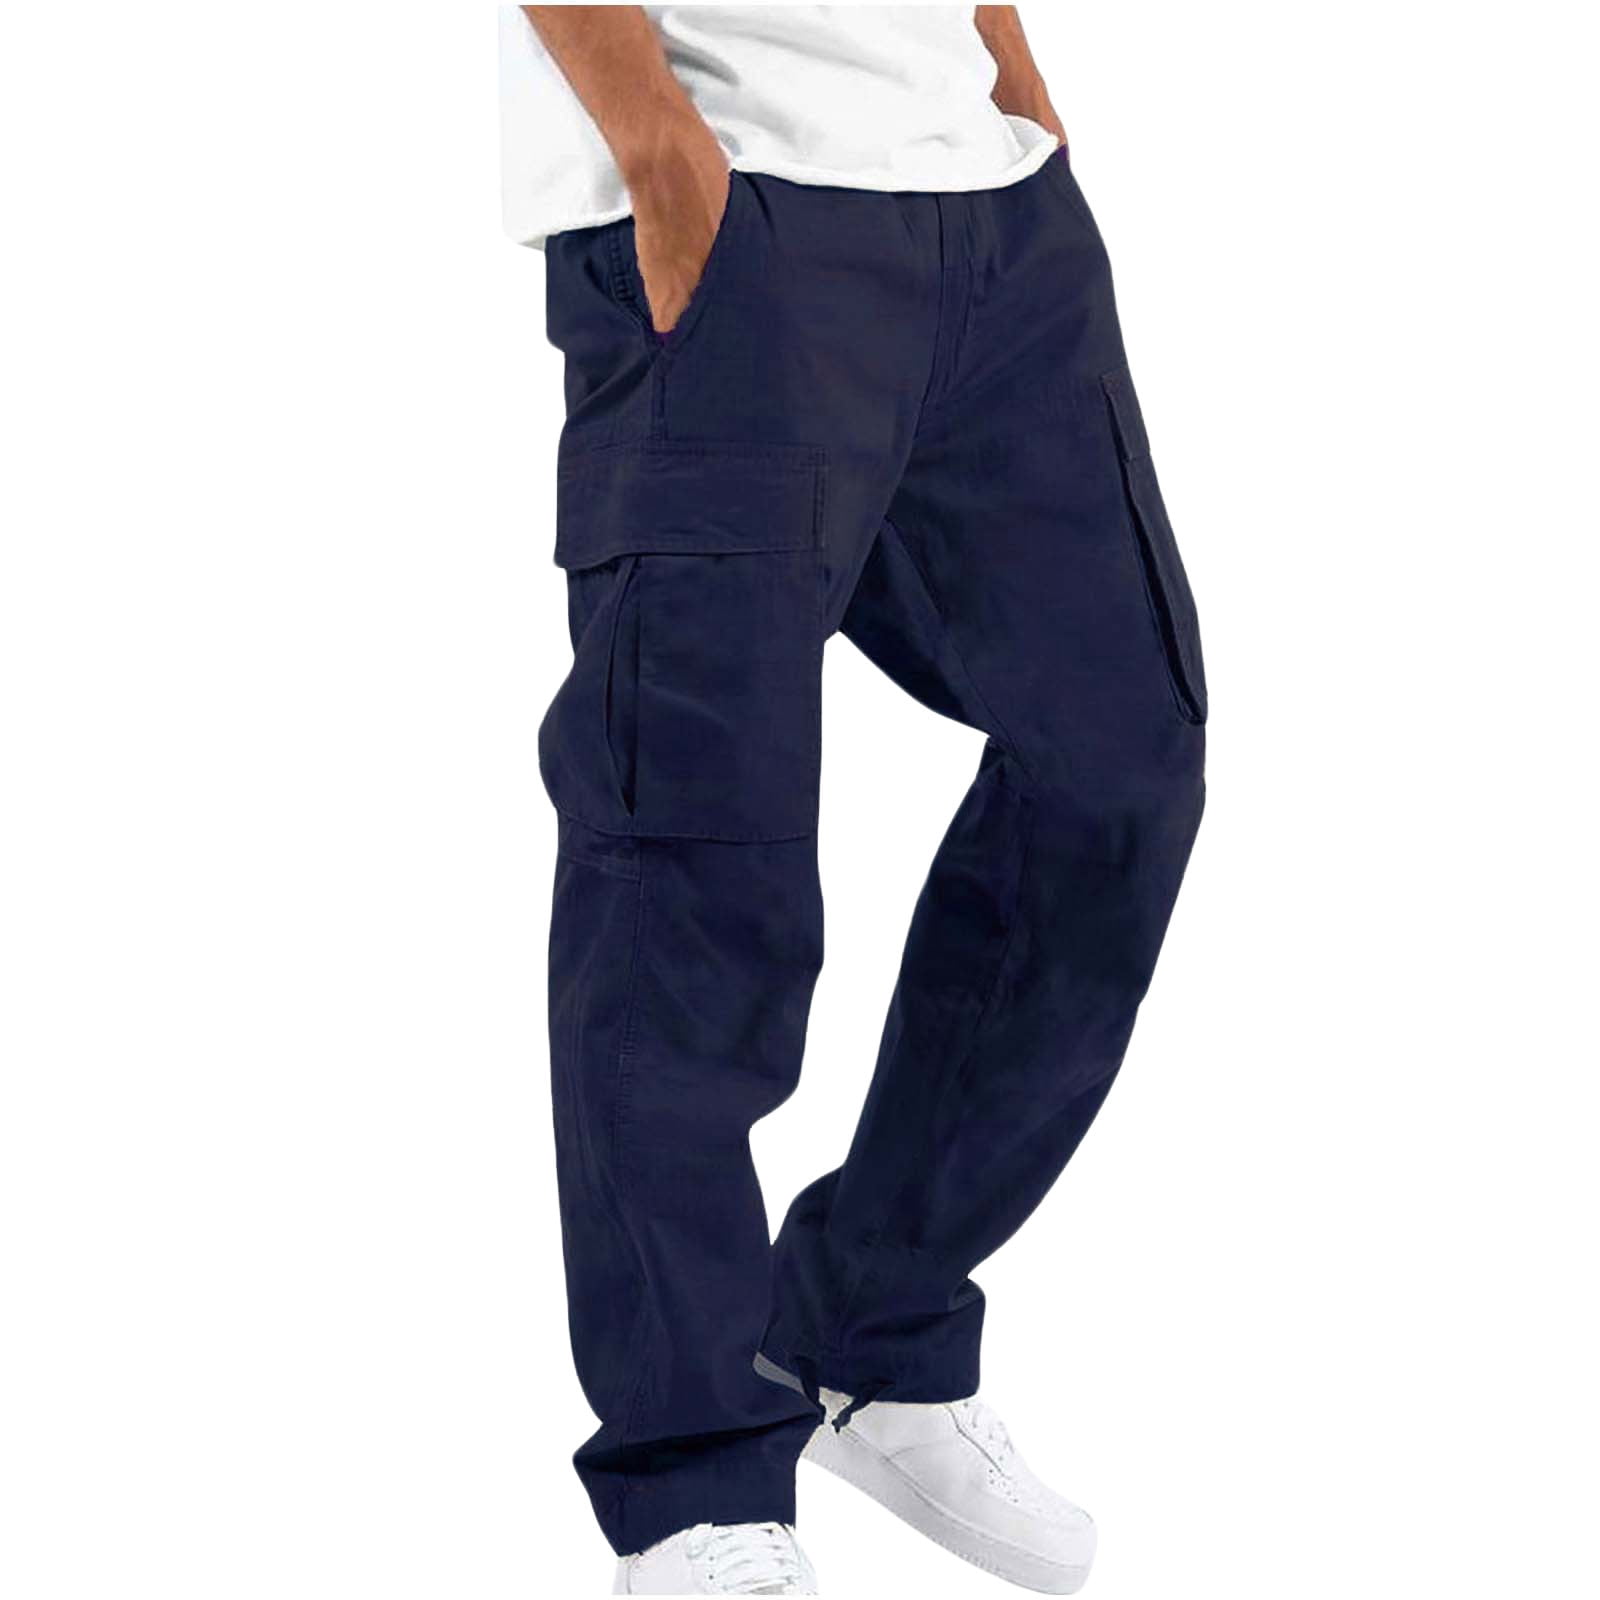 BALEAF Men's Cotton Yoga Sweatpants Open Bottom Joggers Straight Leg  Running Casual Loose Fit Athletic Pants With Pockets Navy Blue XXL 